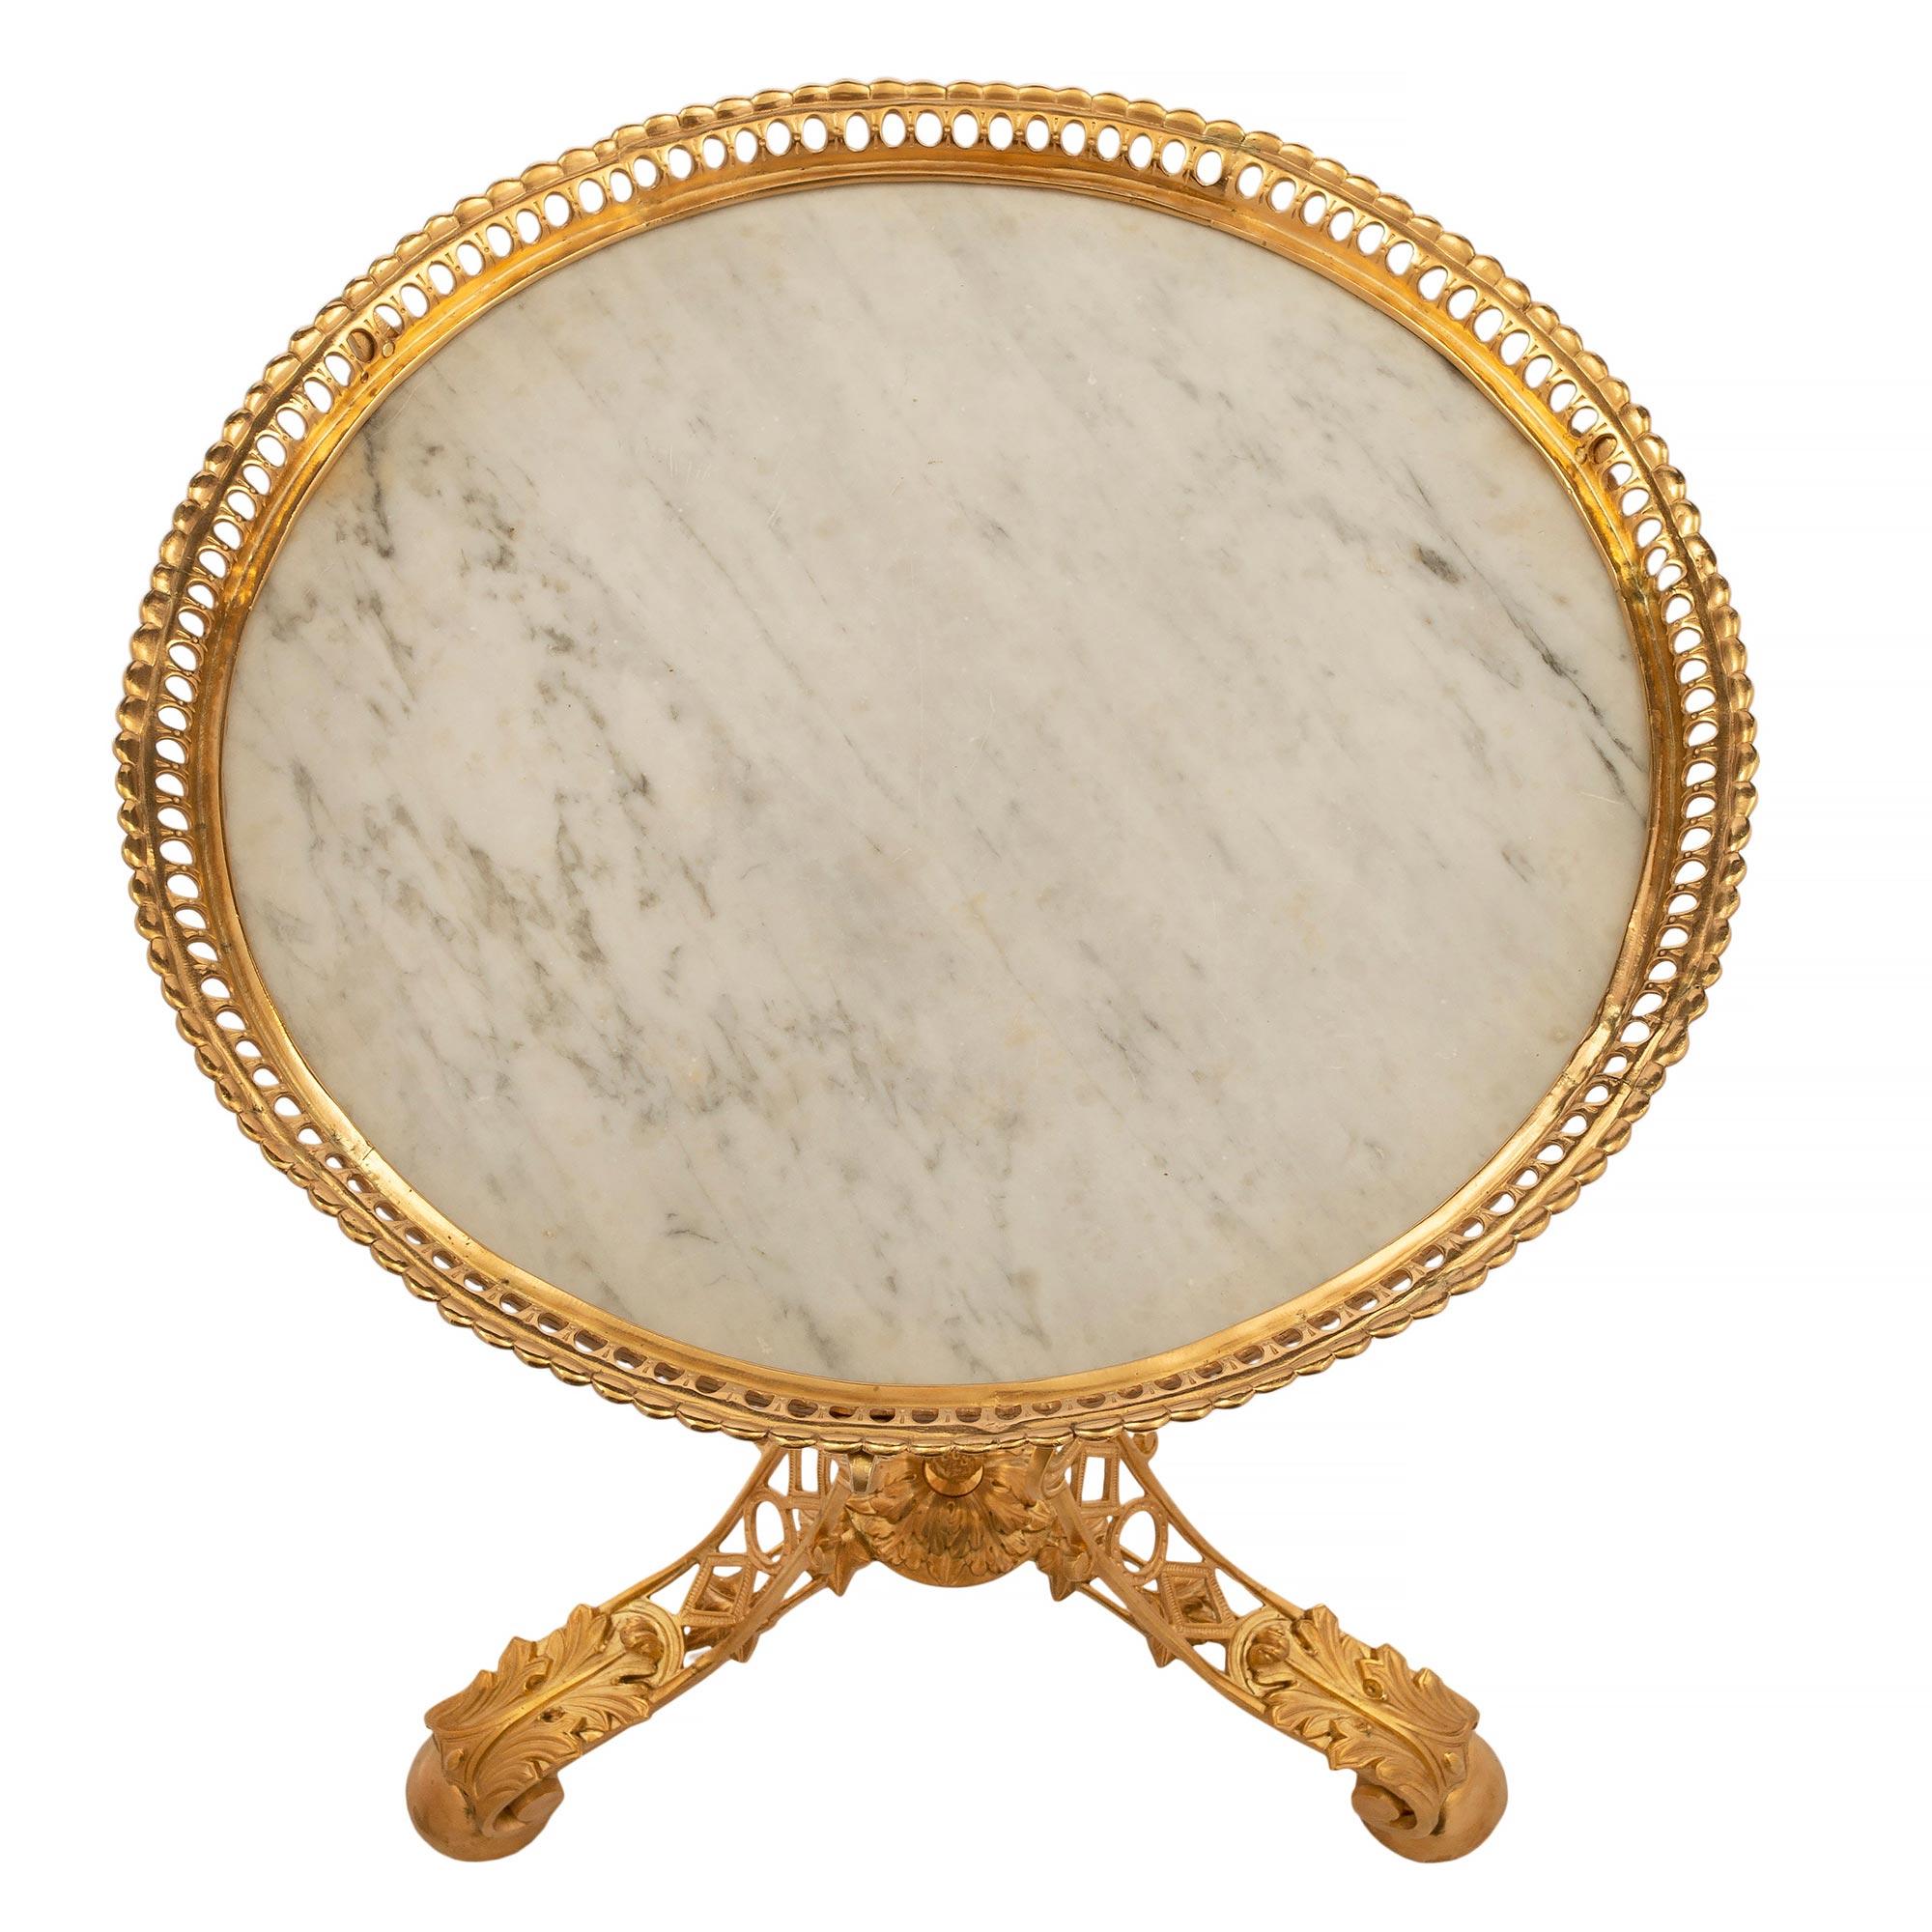 A striking French 19th century Napoleon III Period ormolu and marble side table. The table is raised by lovely half ball feet below large acanthus leaves and three beautiful lightly scrolled pierced legs. Each leg is connected by a fine stretcher